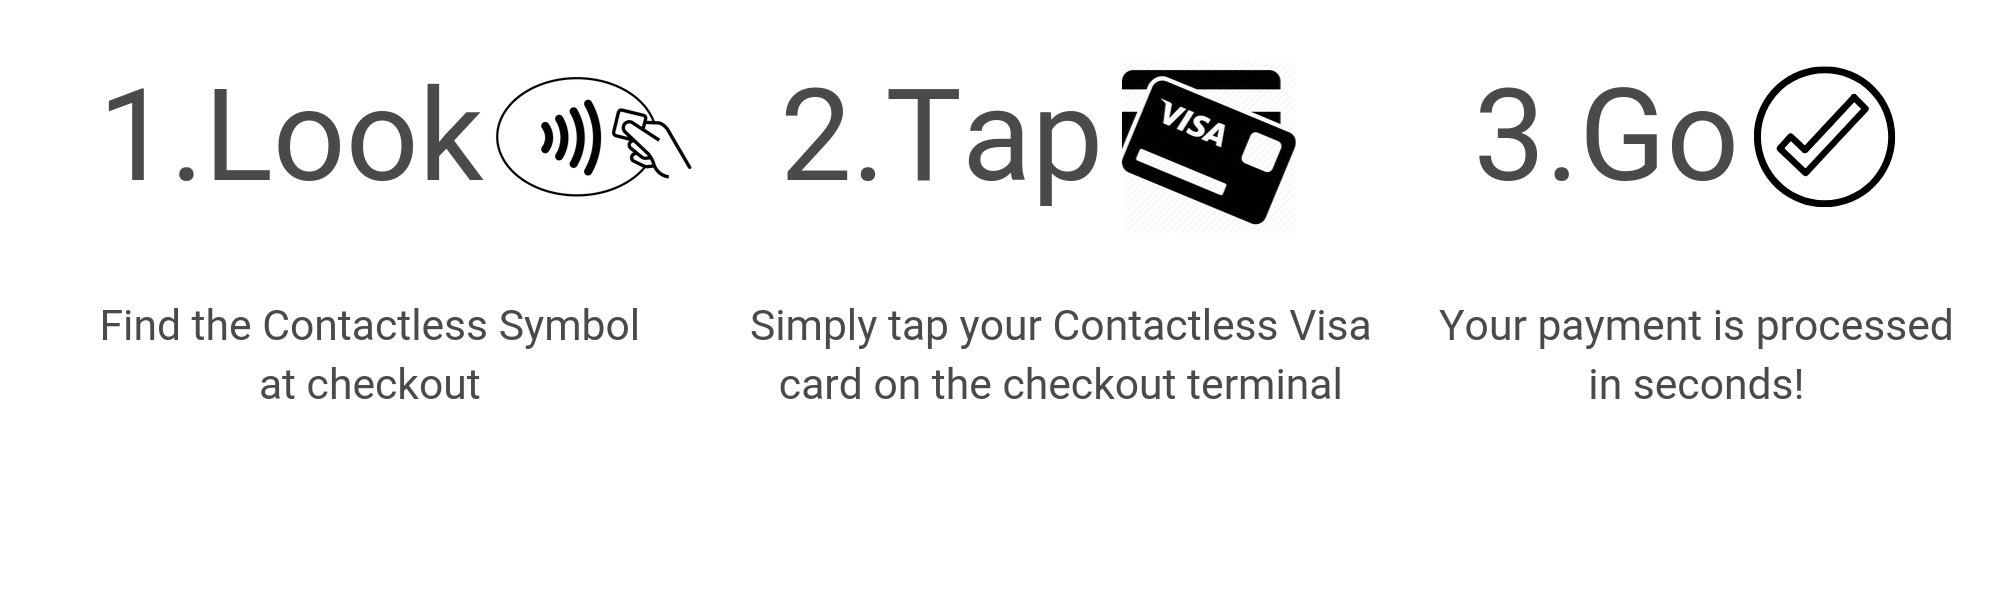 Look Tap Go Contactless Card 